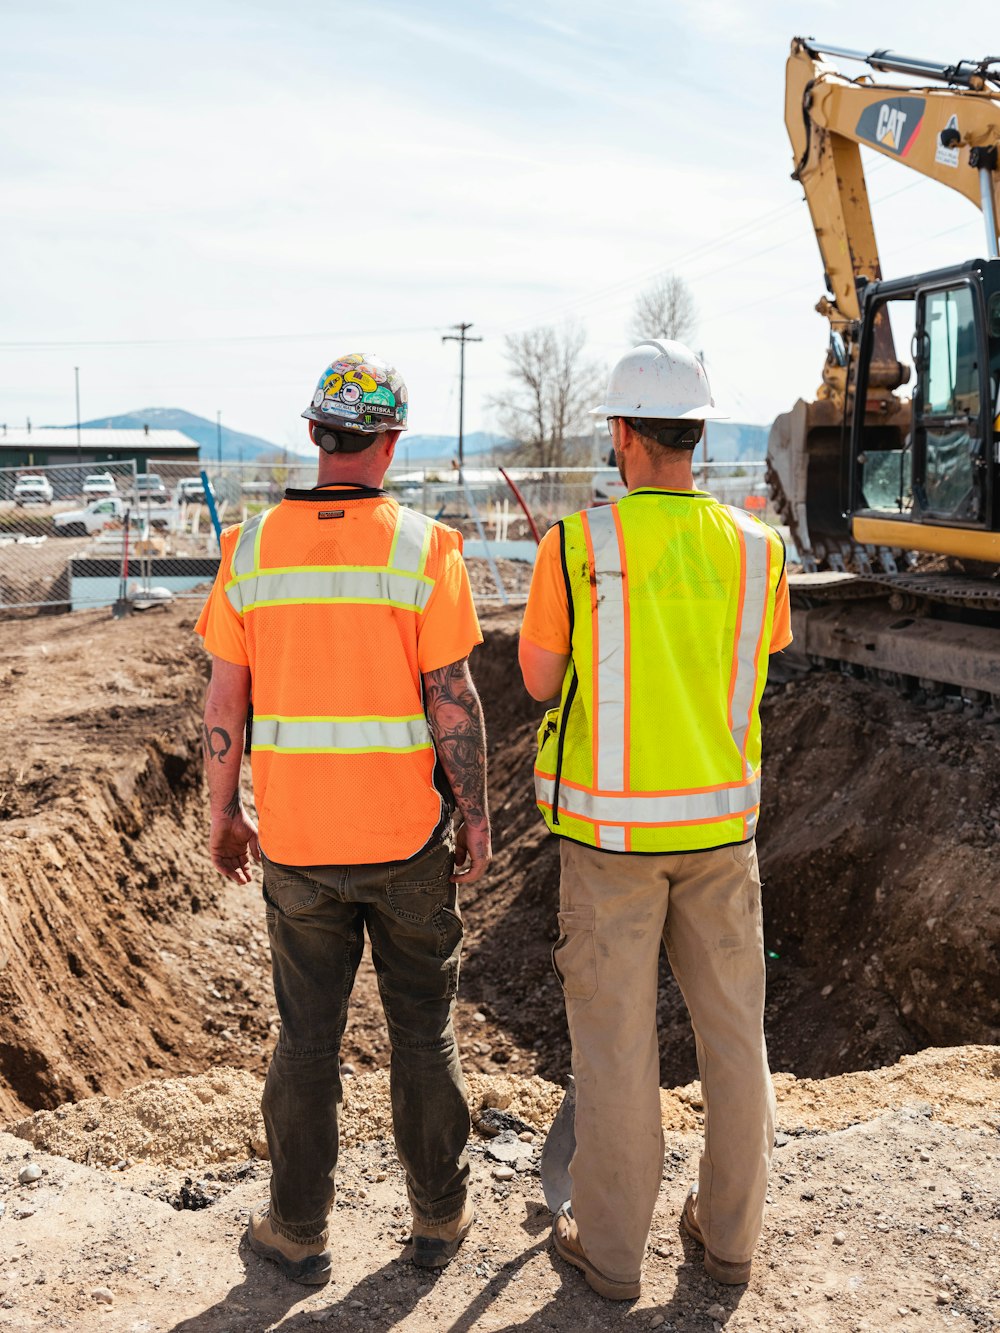 men in safety vests standing in front of a construction vehicle